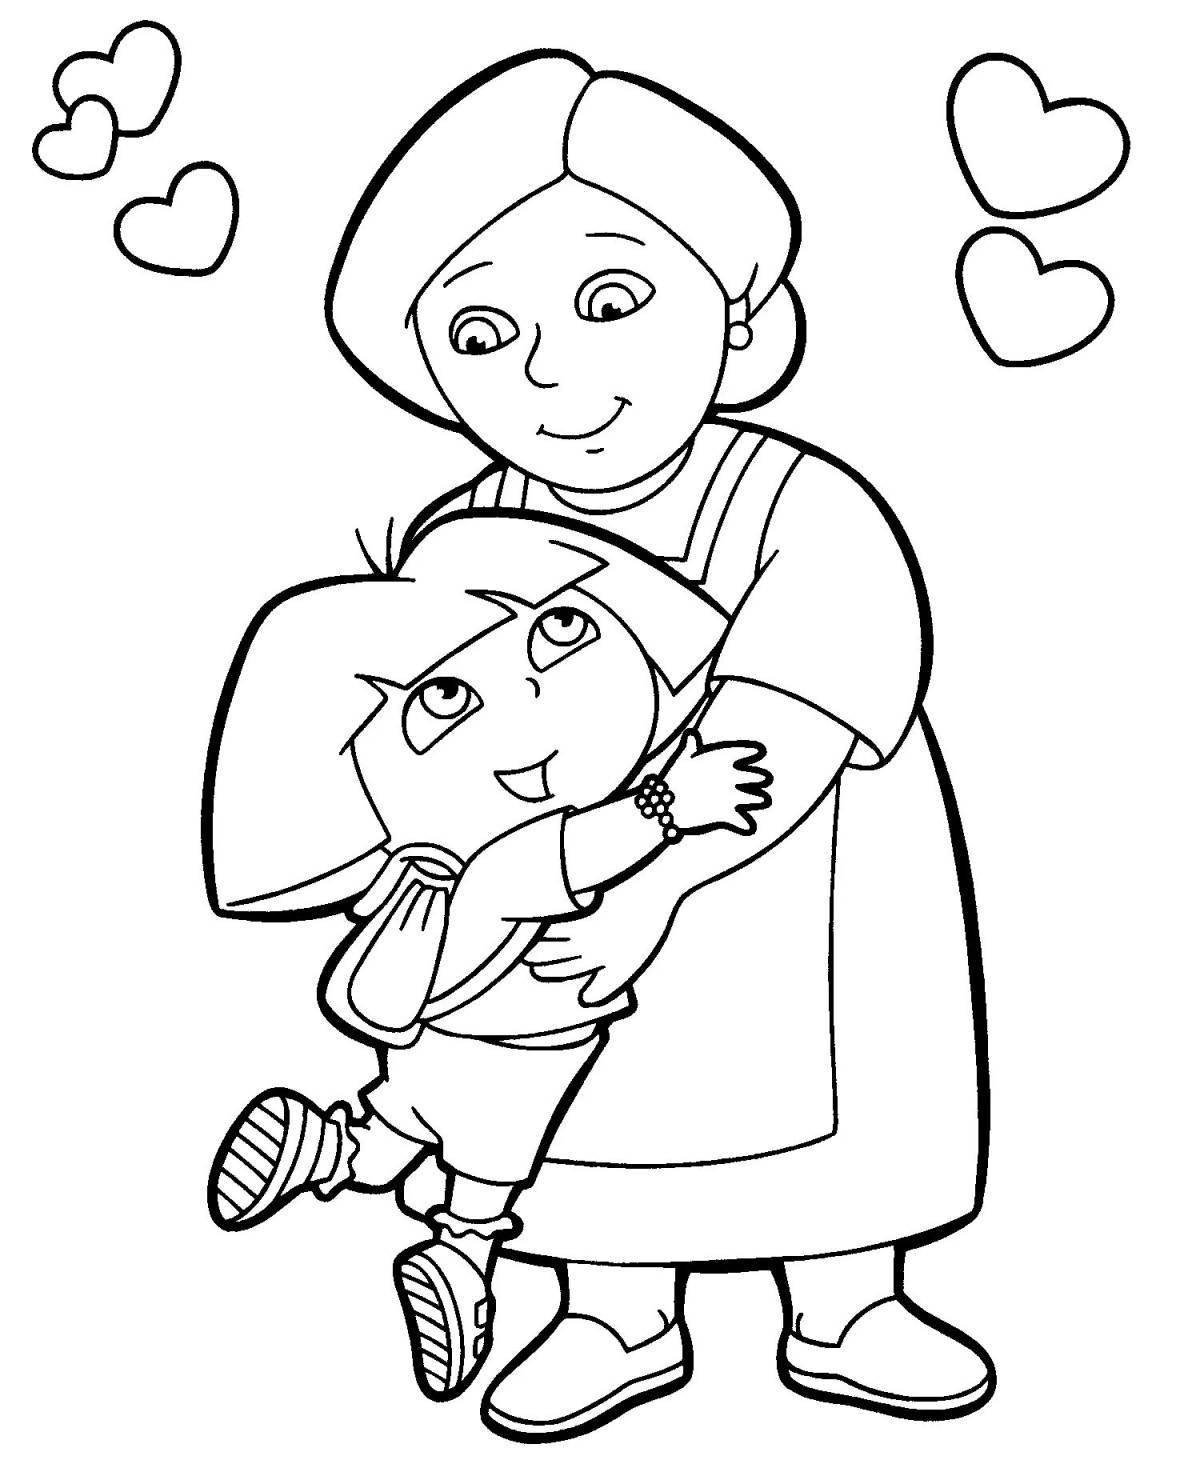 Glowing grandma and granddaughter coloring page